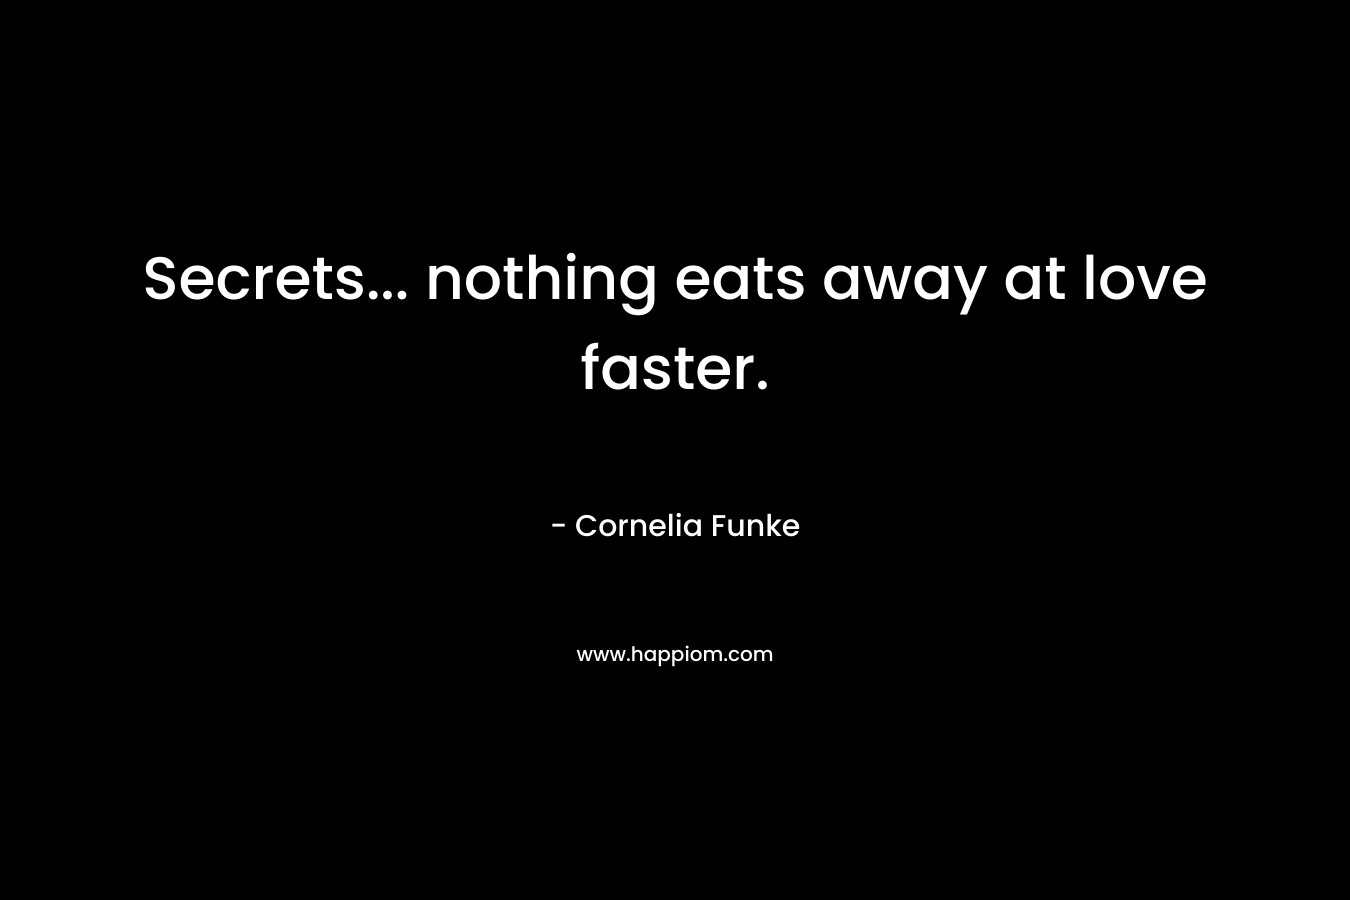 Secrets... nothing eats away at love faster.